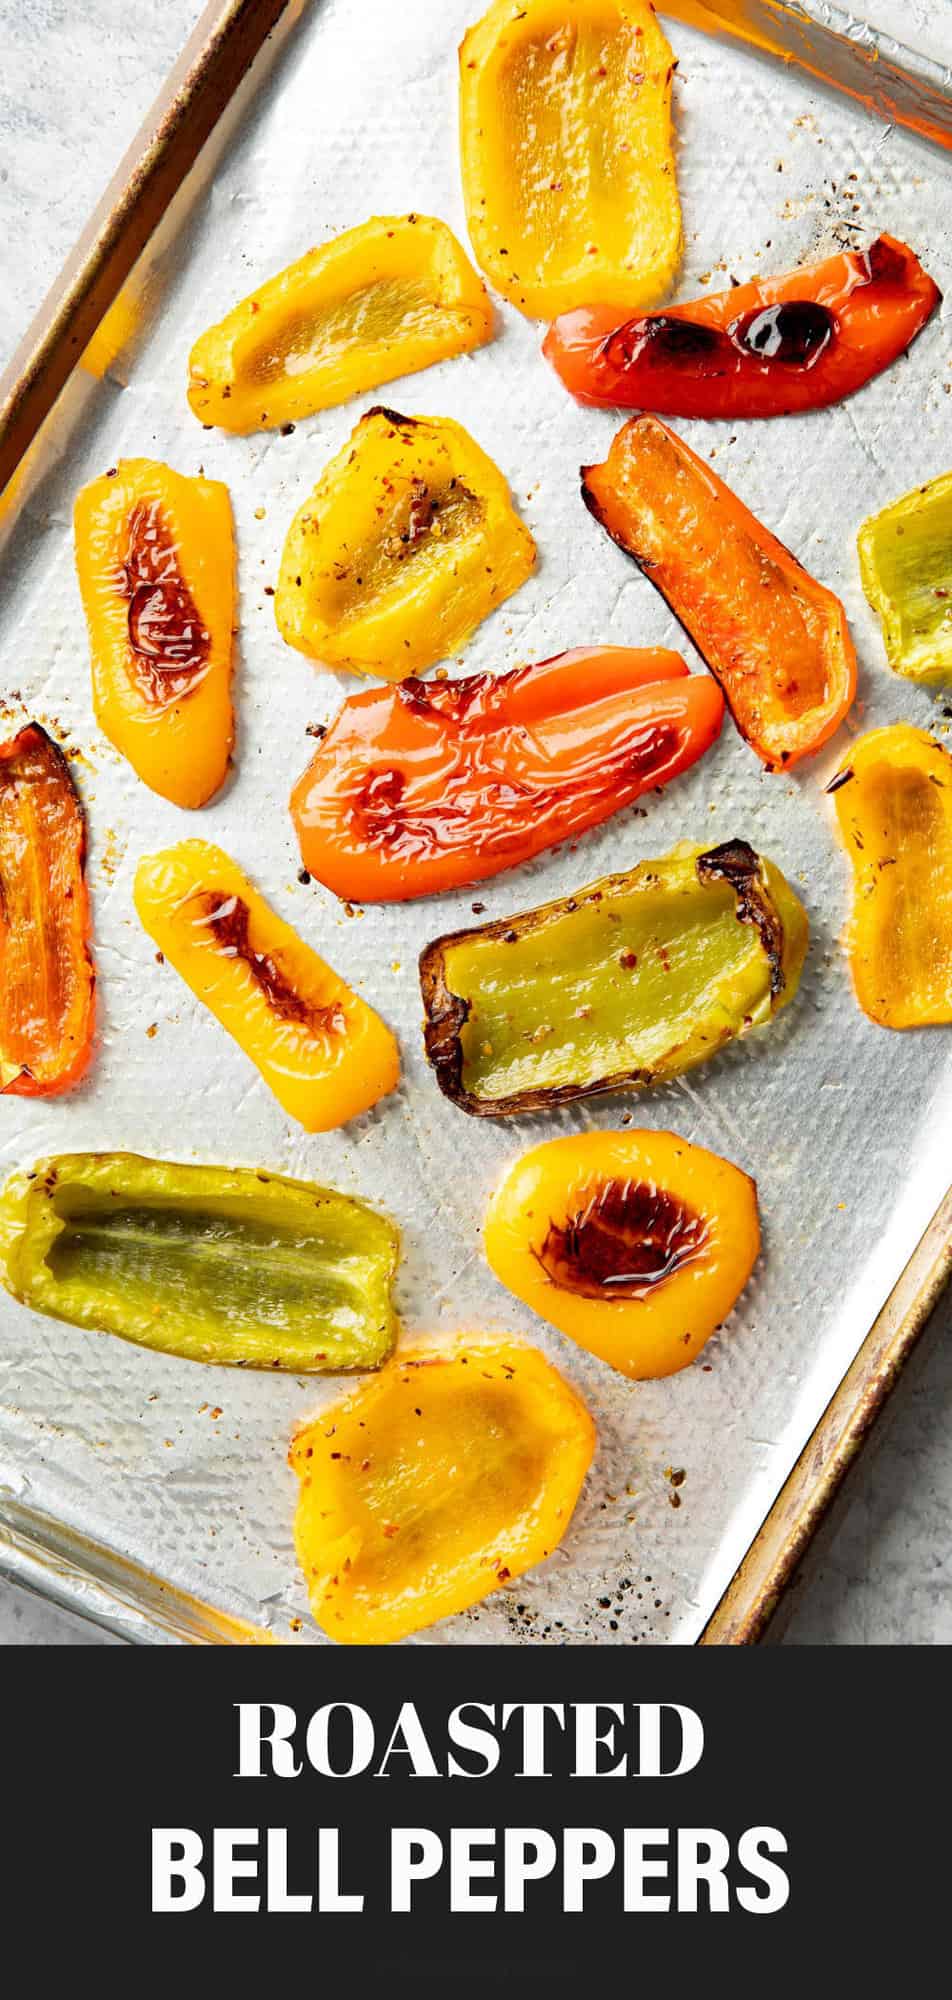 Roasted Bell Peppers - Easy & Yummy! - Beaming Baker